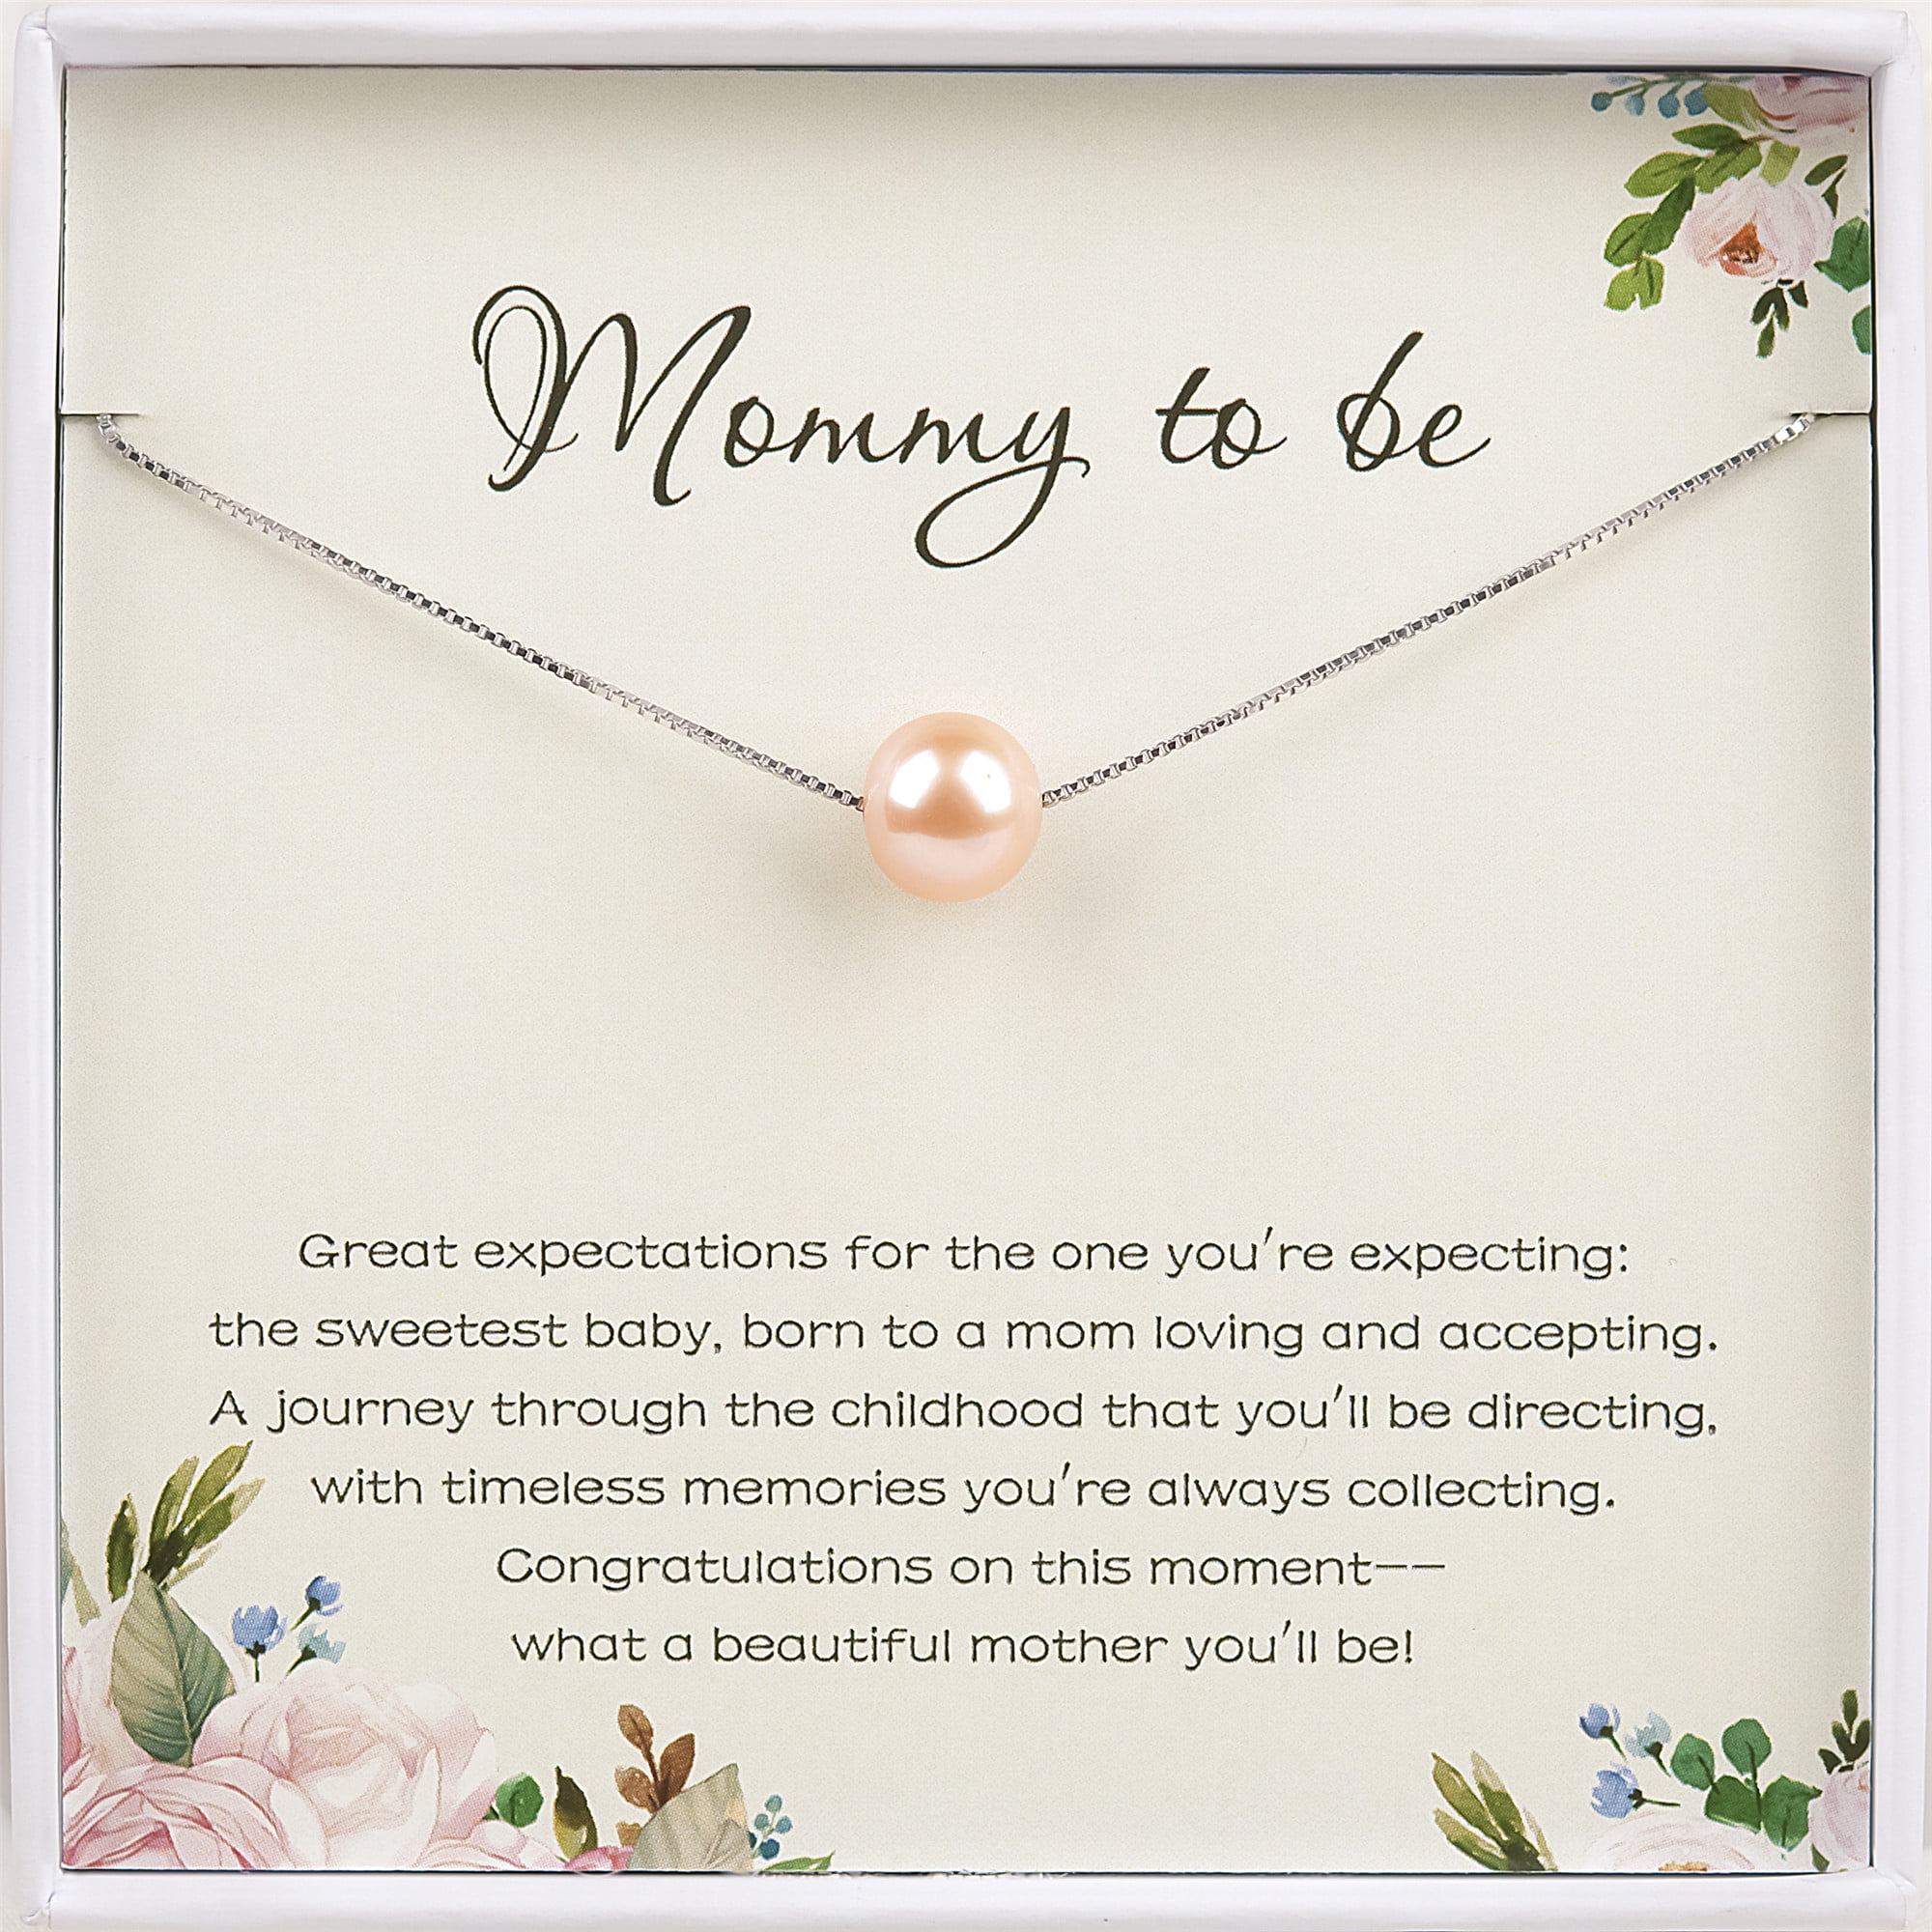 Great Choice Products Mom To Be Gifts Pregnancy Gifts - First Time Mom Gifts,  Promoted To Mom